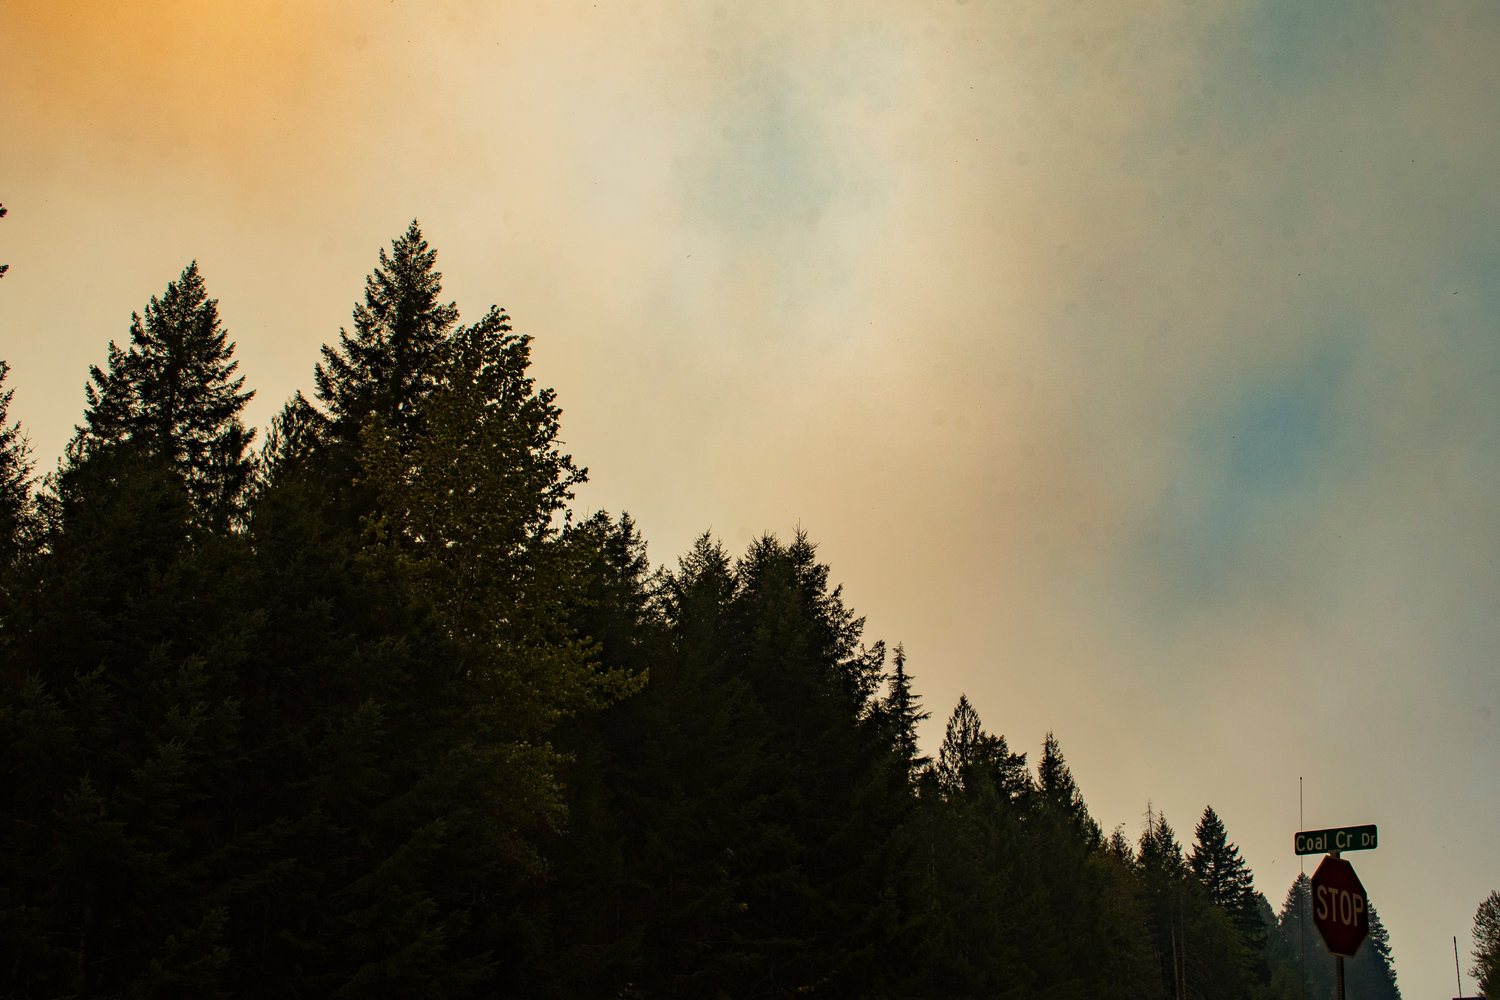 Smoke from the Goat Rocks Fire rises in heavy orange plumes above the trees near Coal Creek Drive east of Packwood.